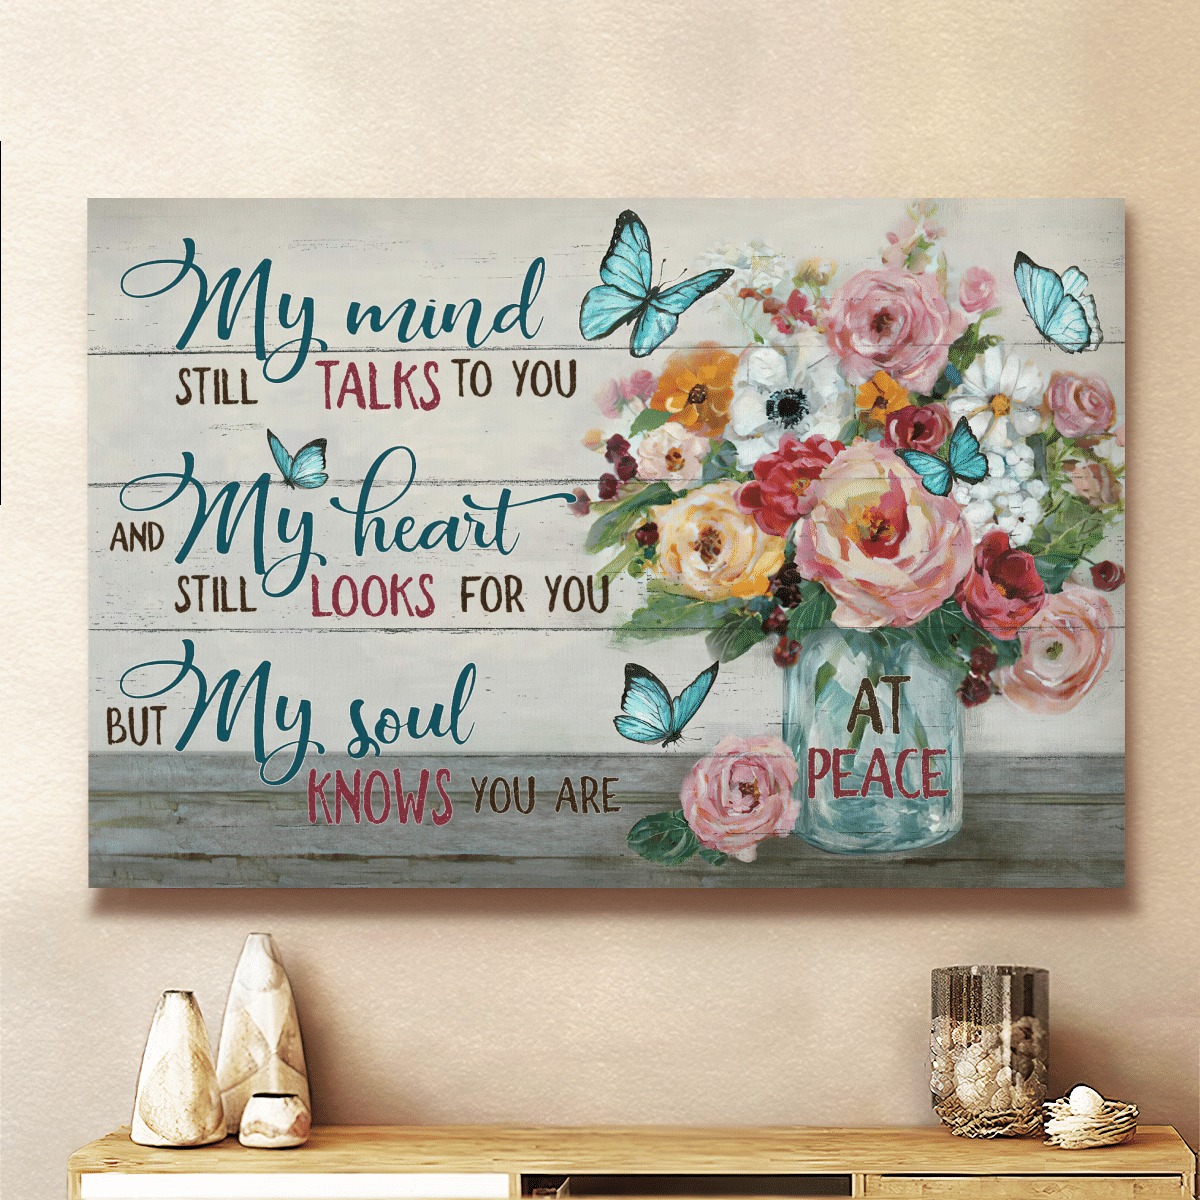 Jesus Flower vase My mind still talks to you at peace poster, canvas 2